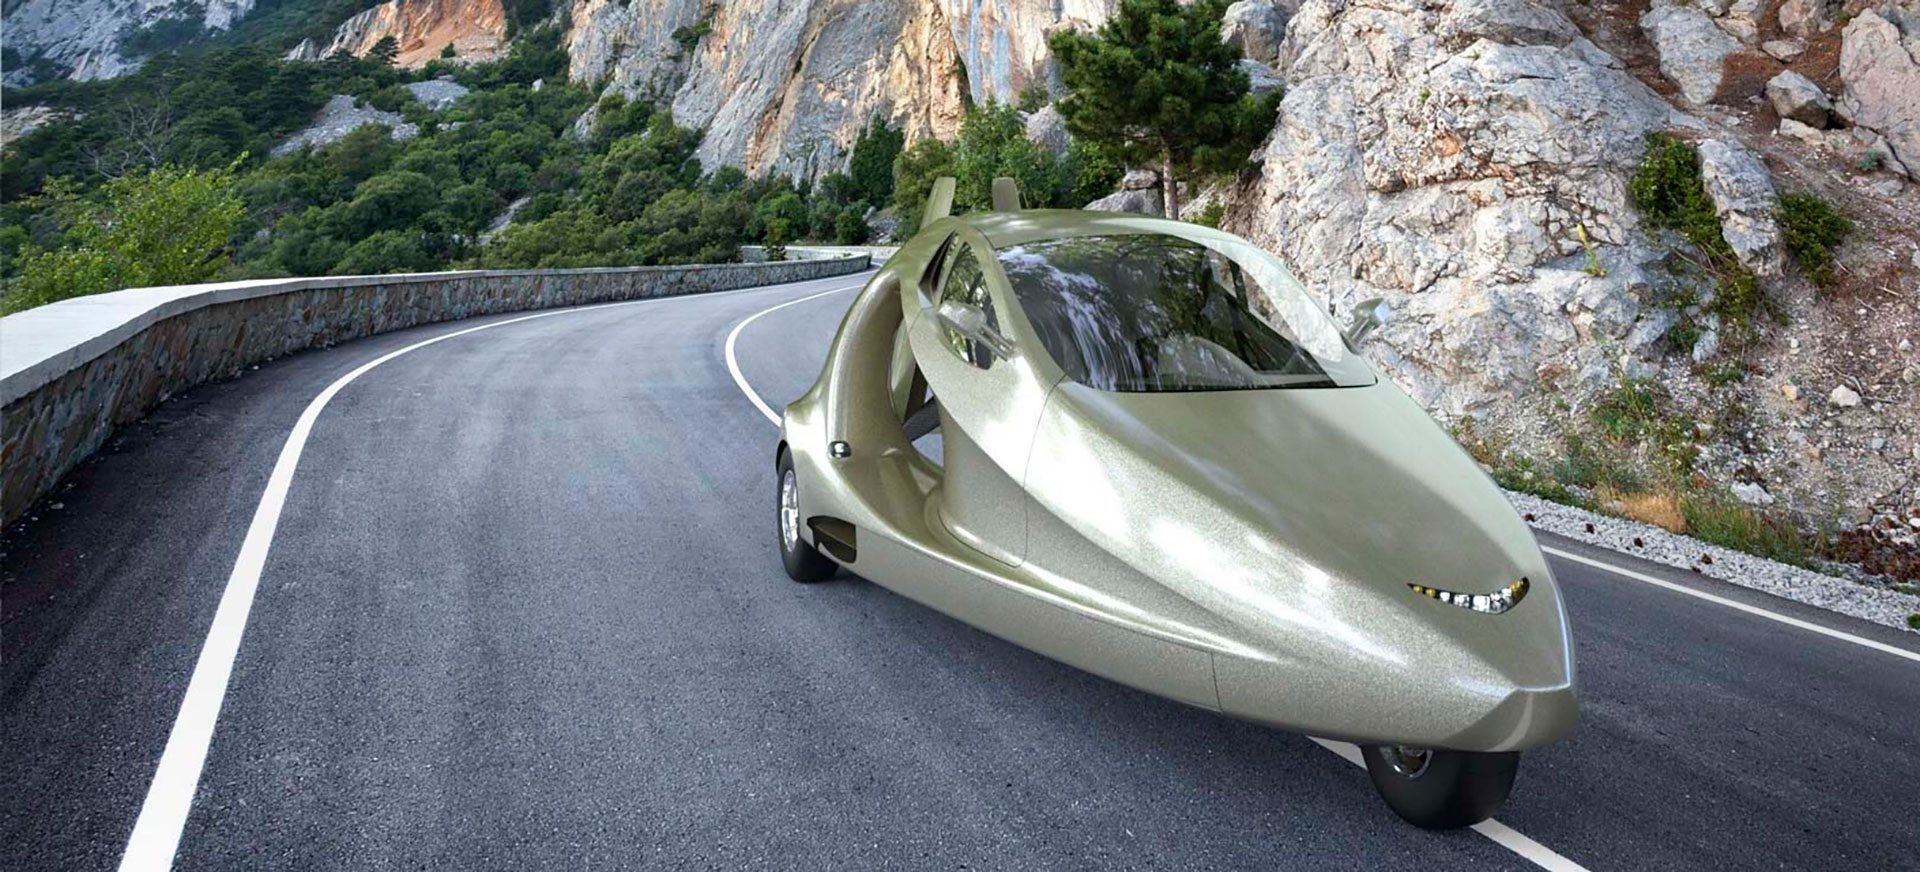 The flying car can work on the streets and in the air